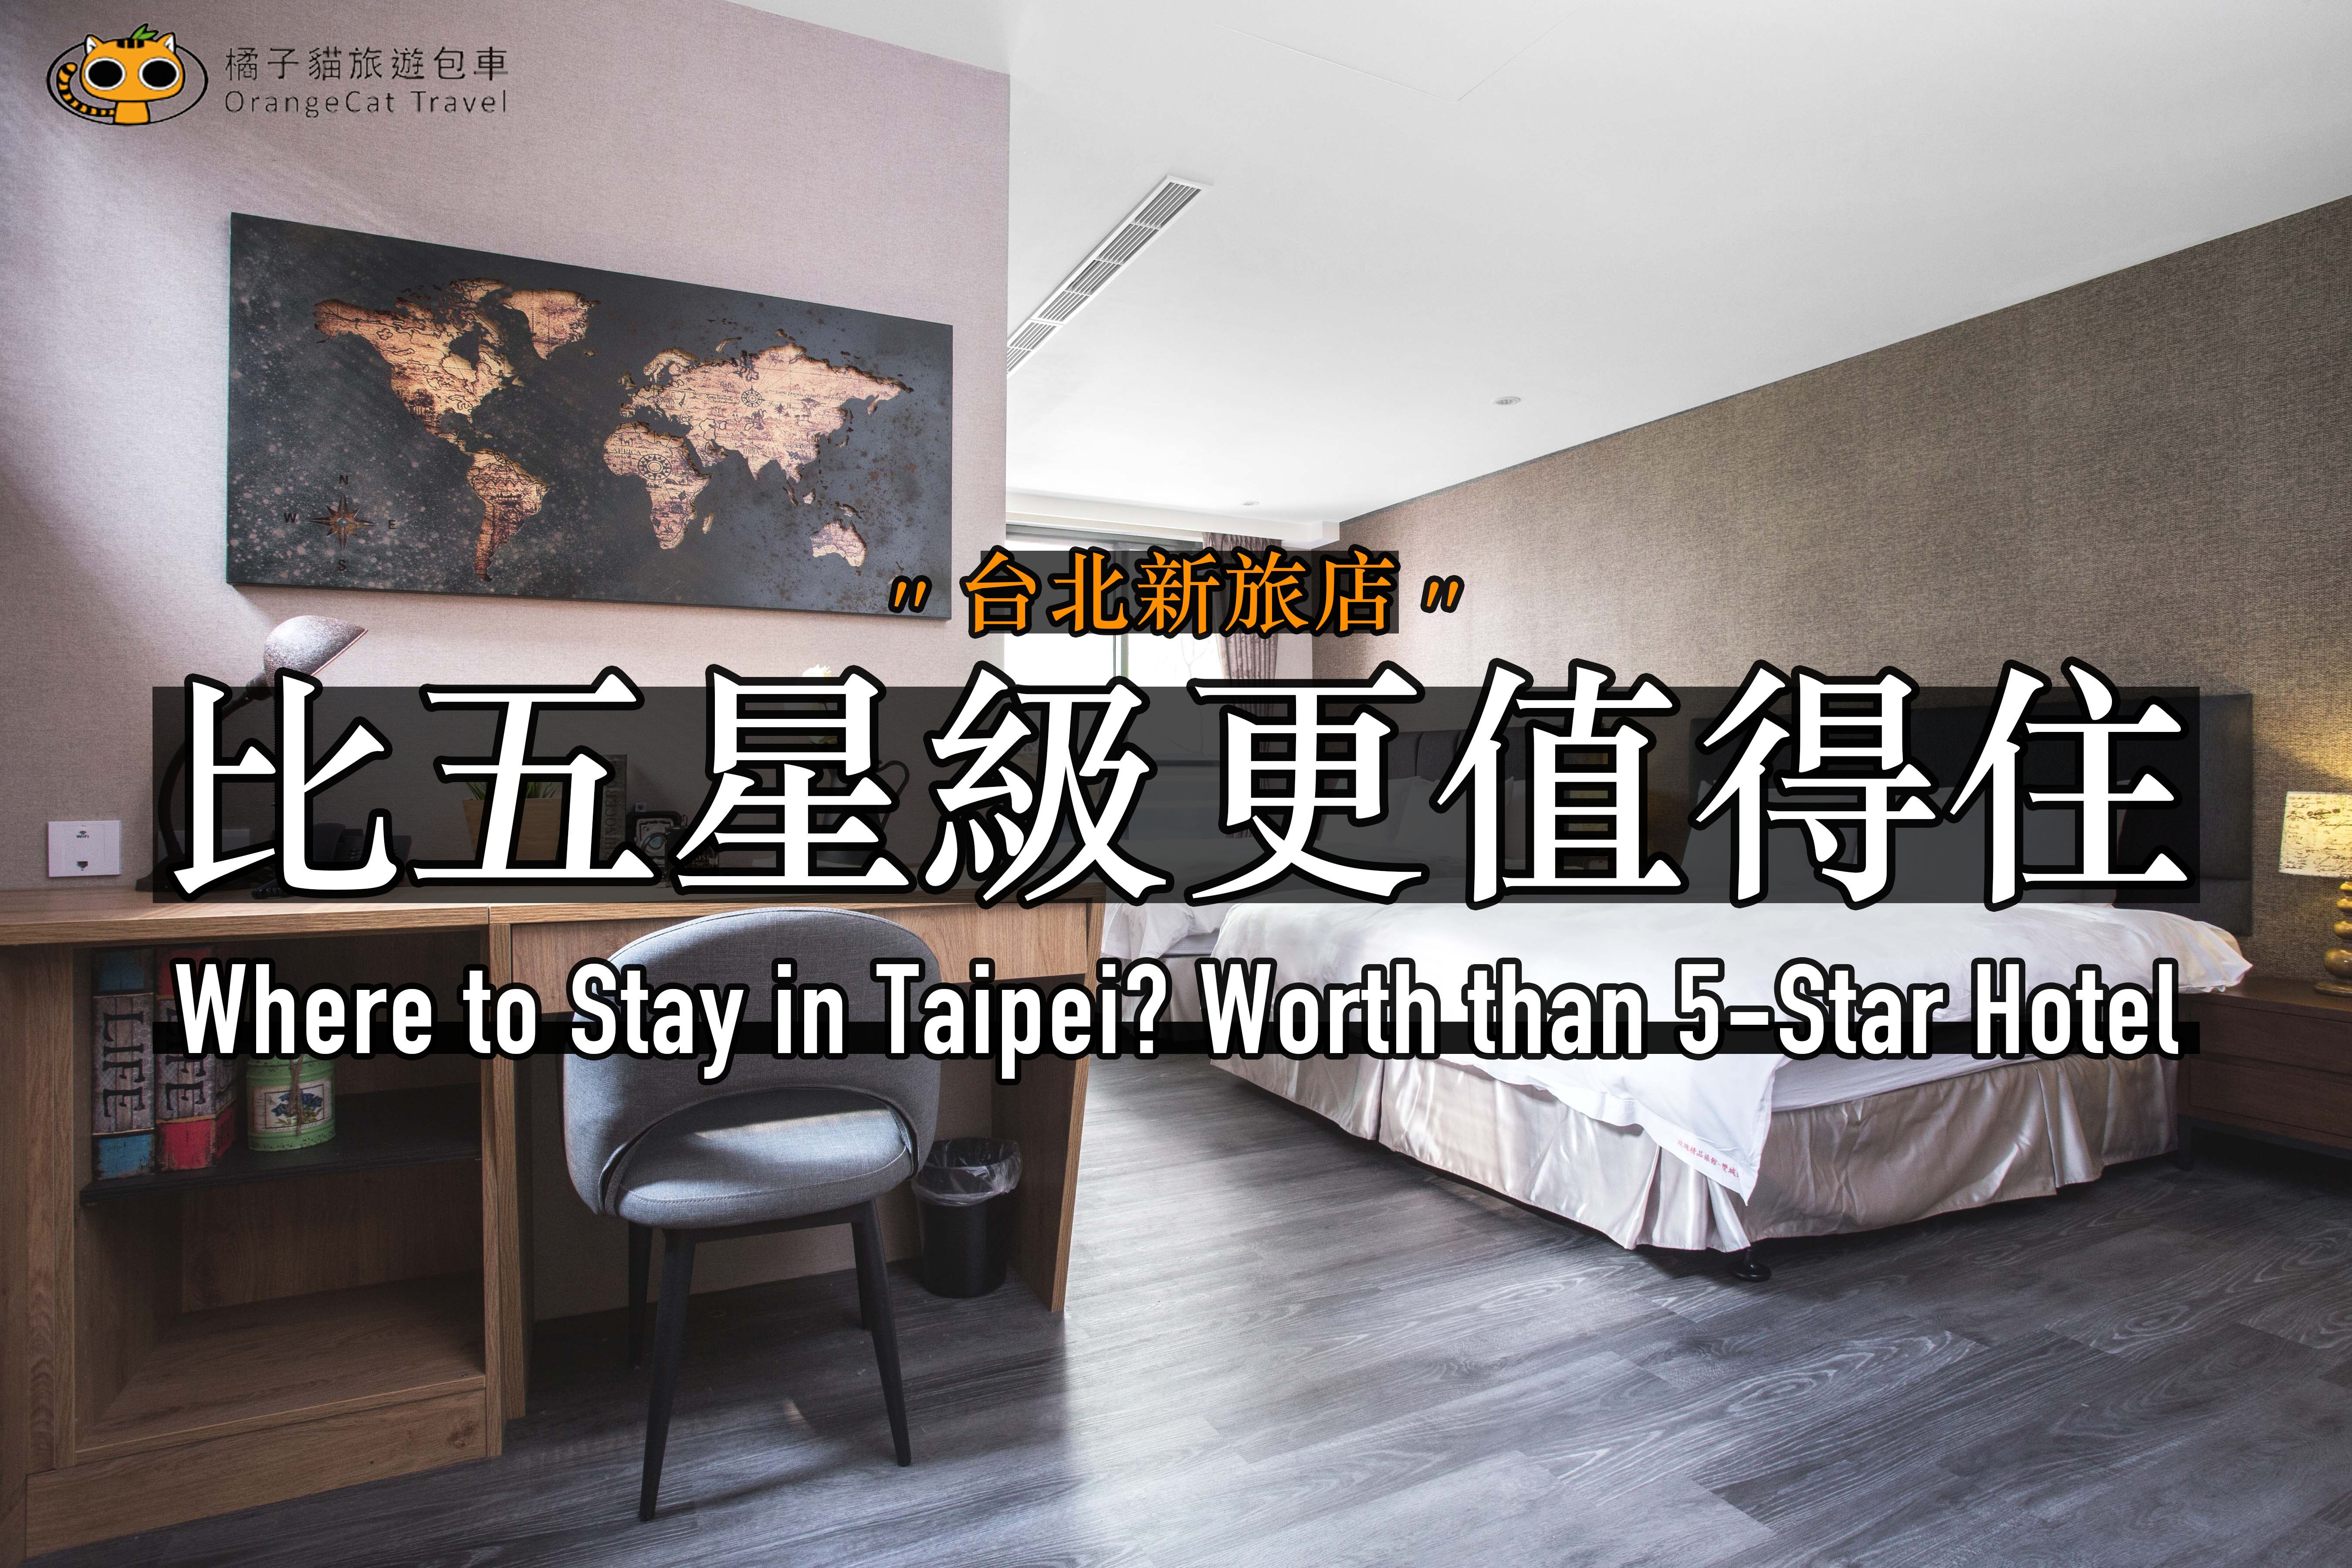 Brand New Hotel in Taipei - Better than 5 Star!